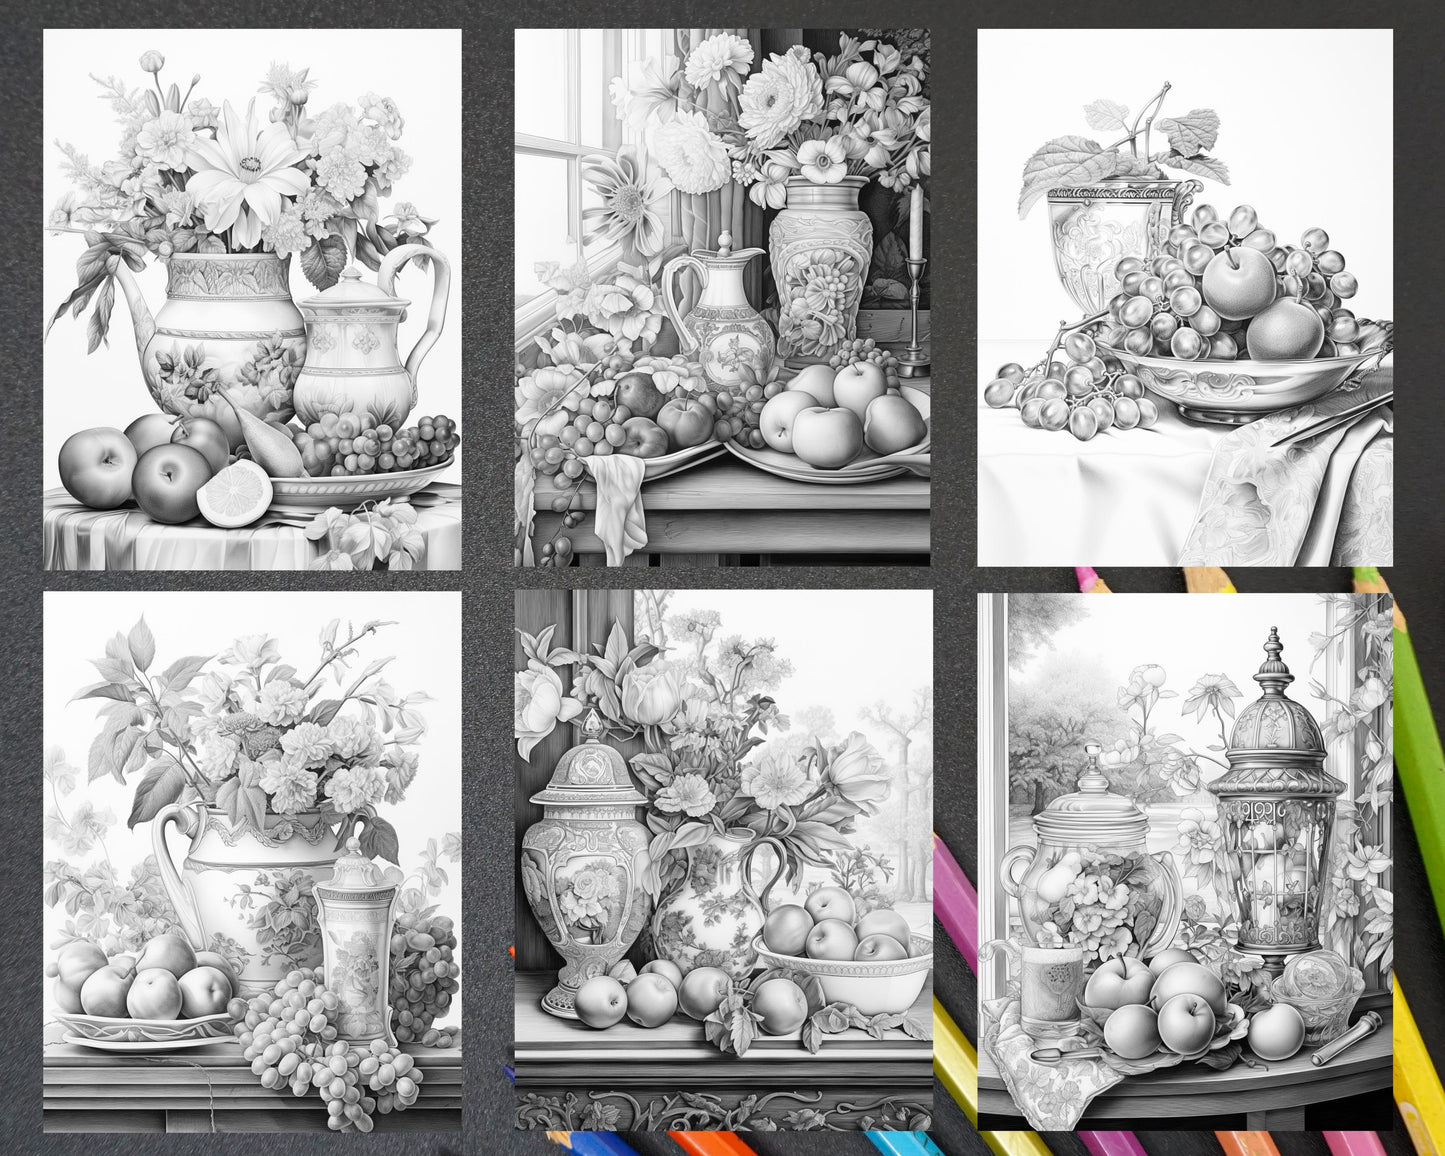 still life grayscale coloring pages, printable coloring pages for adults, grayscale art, stress relief coloring, black and white coloring, grayscale illustrations